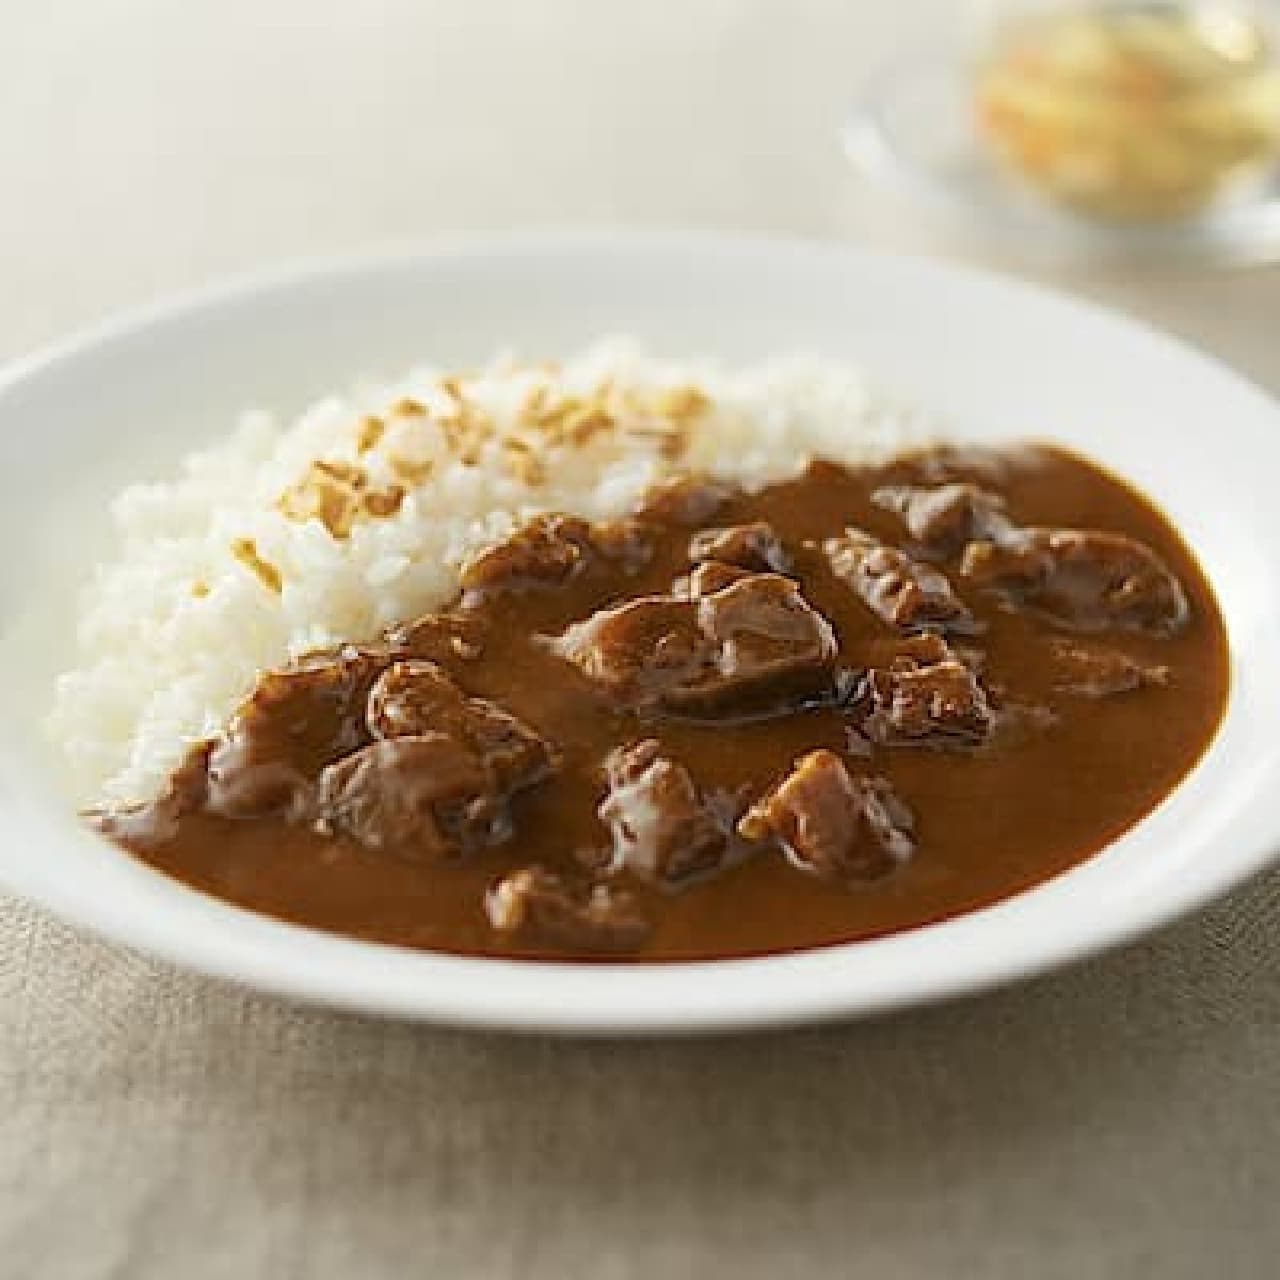 MUJI "Fon de Vaux's spicy beef curry that makes the best use of the material"